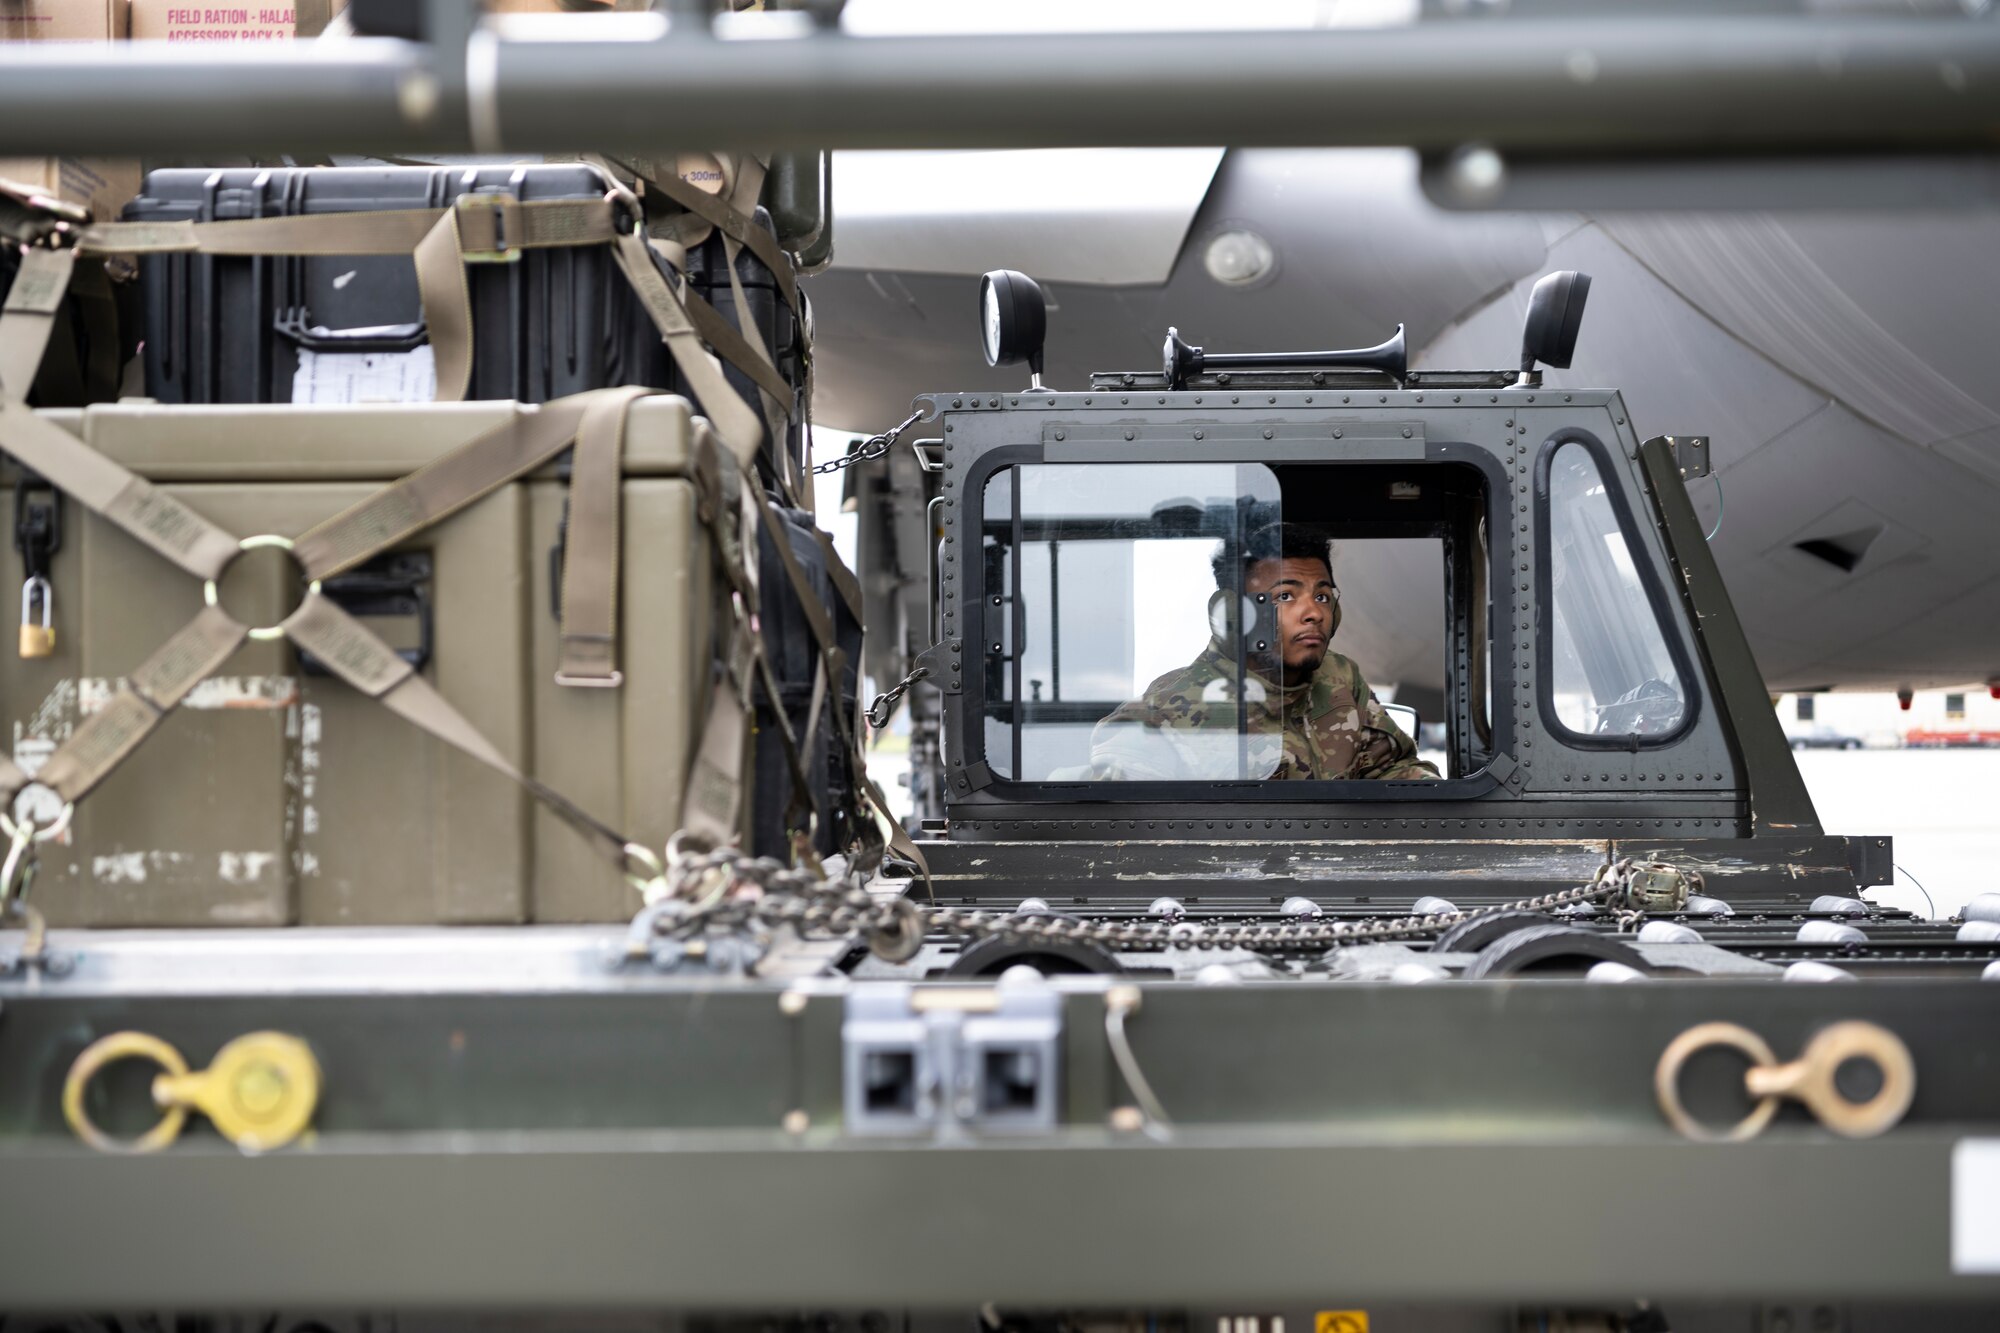 U.S. Air Force Staff Sgt. Jordan Gilchrist, 726th Air Mobility Squadron aircraft services supervisor, uses a Tunner 60K aircraft cargo loader to load cargo onto a Republic of Singapore Air Force A330 Multi-Role Tanker Transport aircraft on Spangdahlem Air Base, Germany, Aug. 30, 2021.